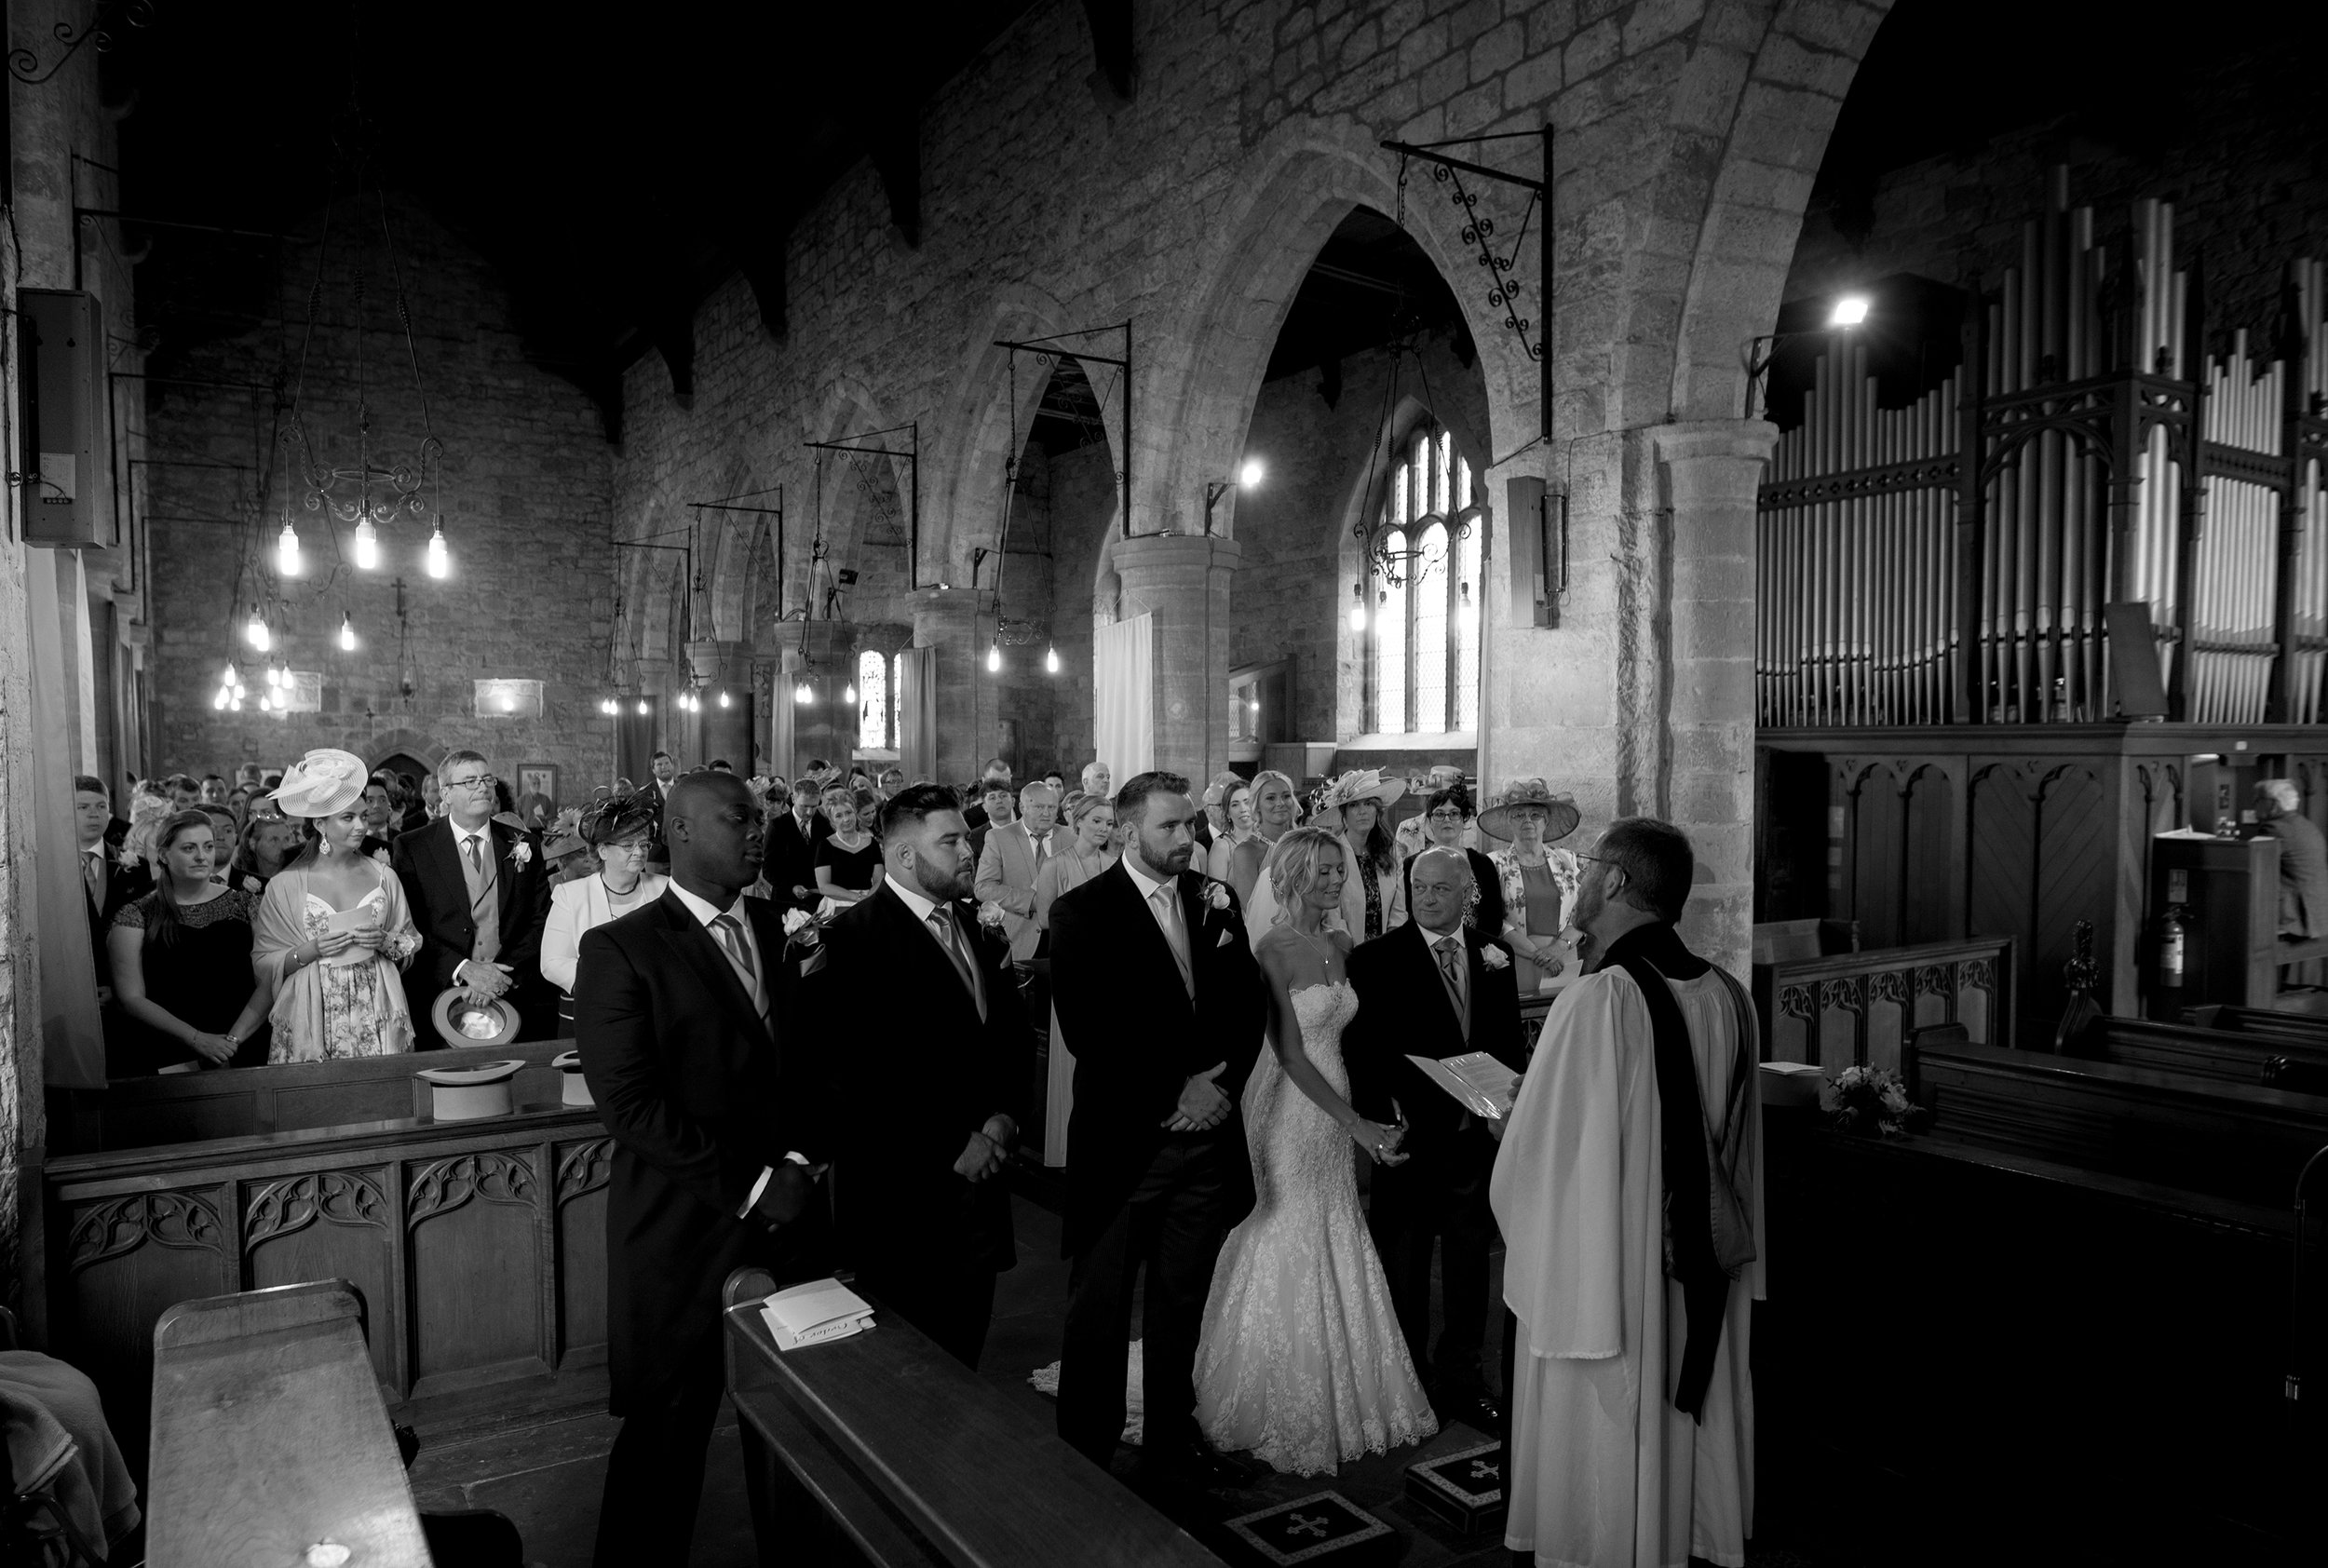 A black and white image of the bridal party in the church